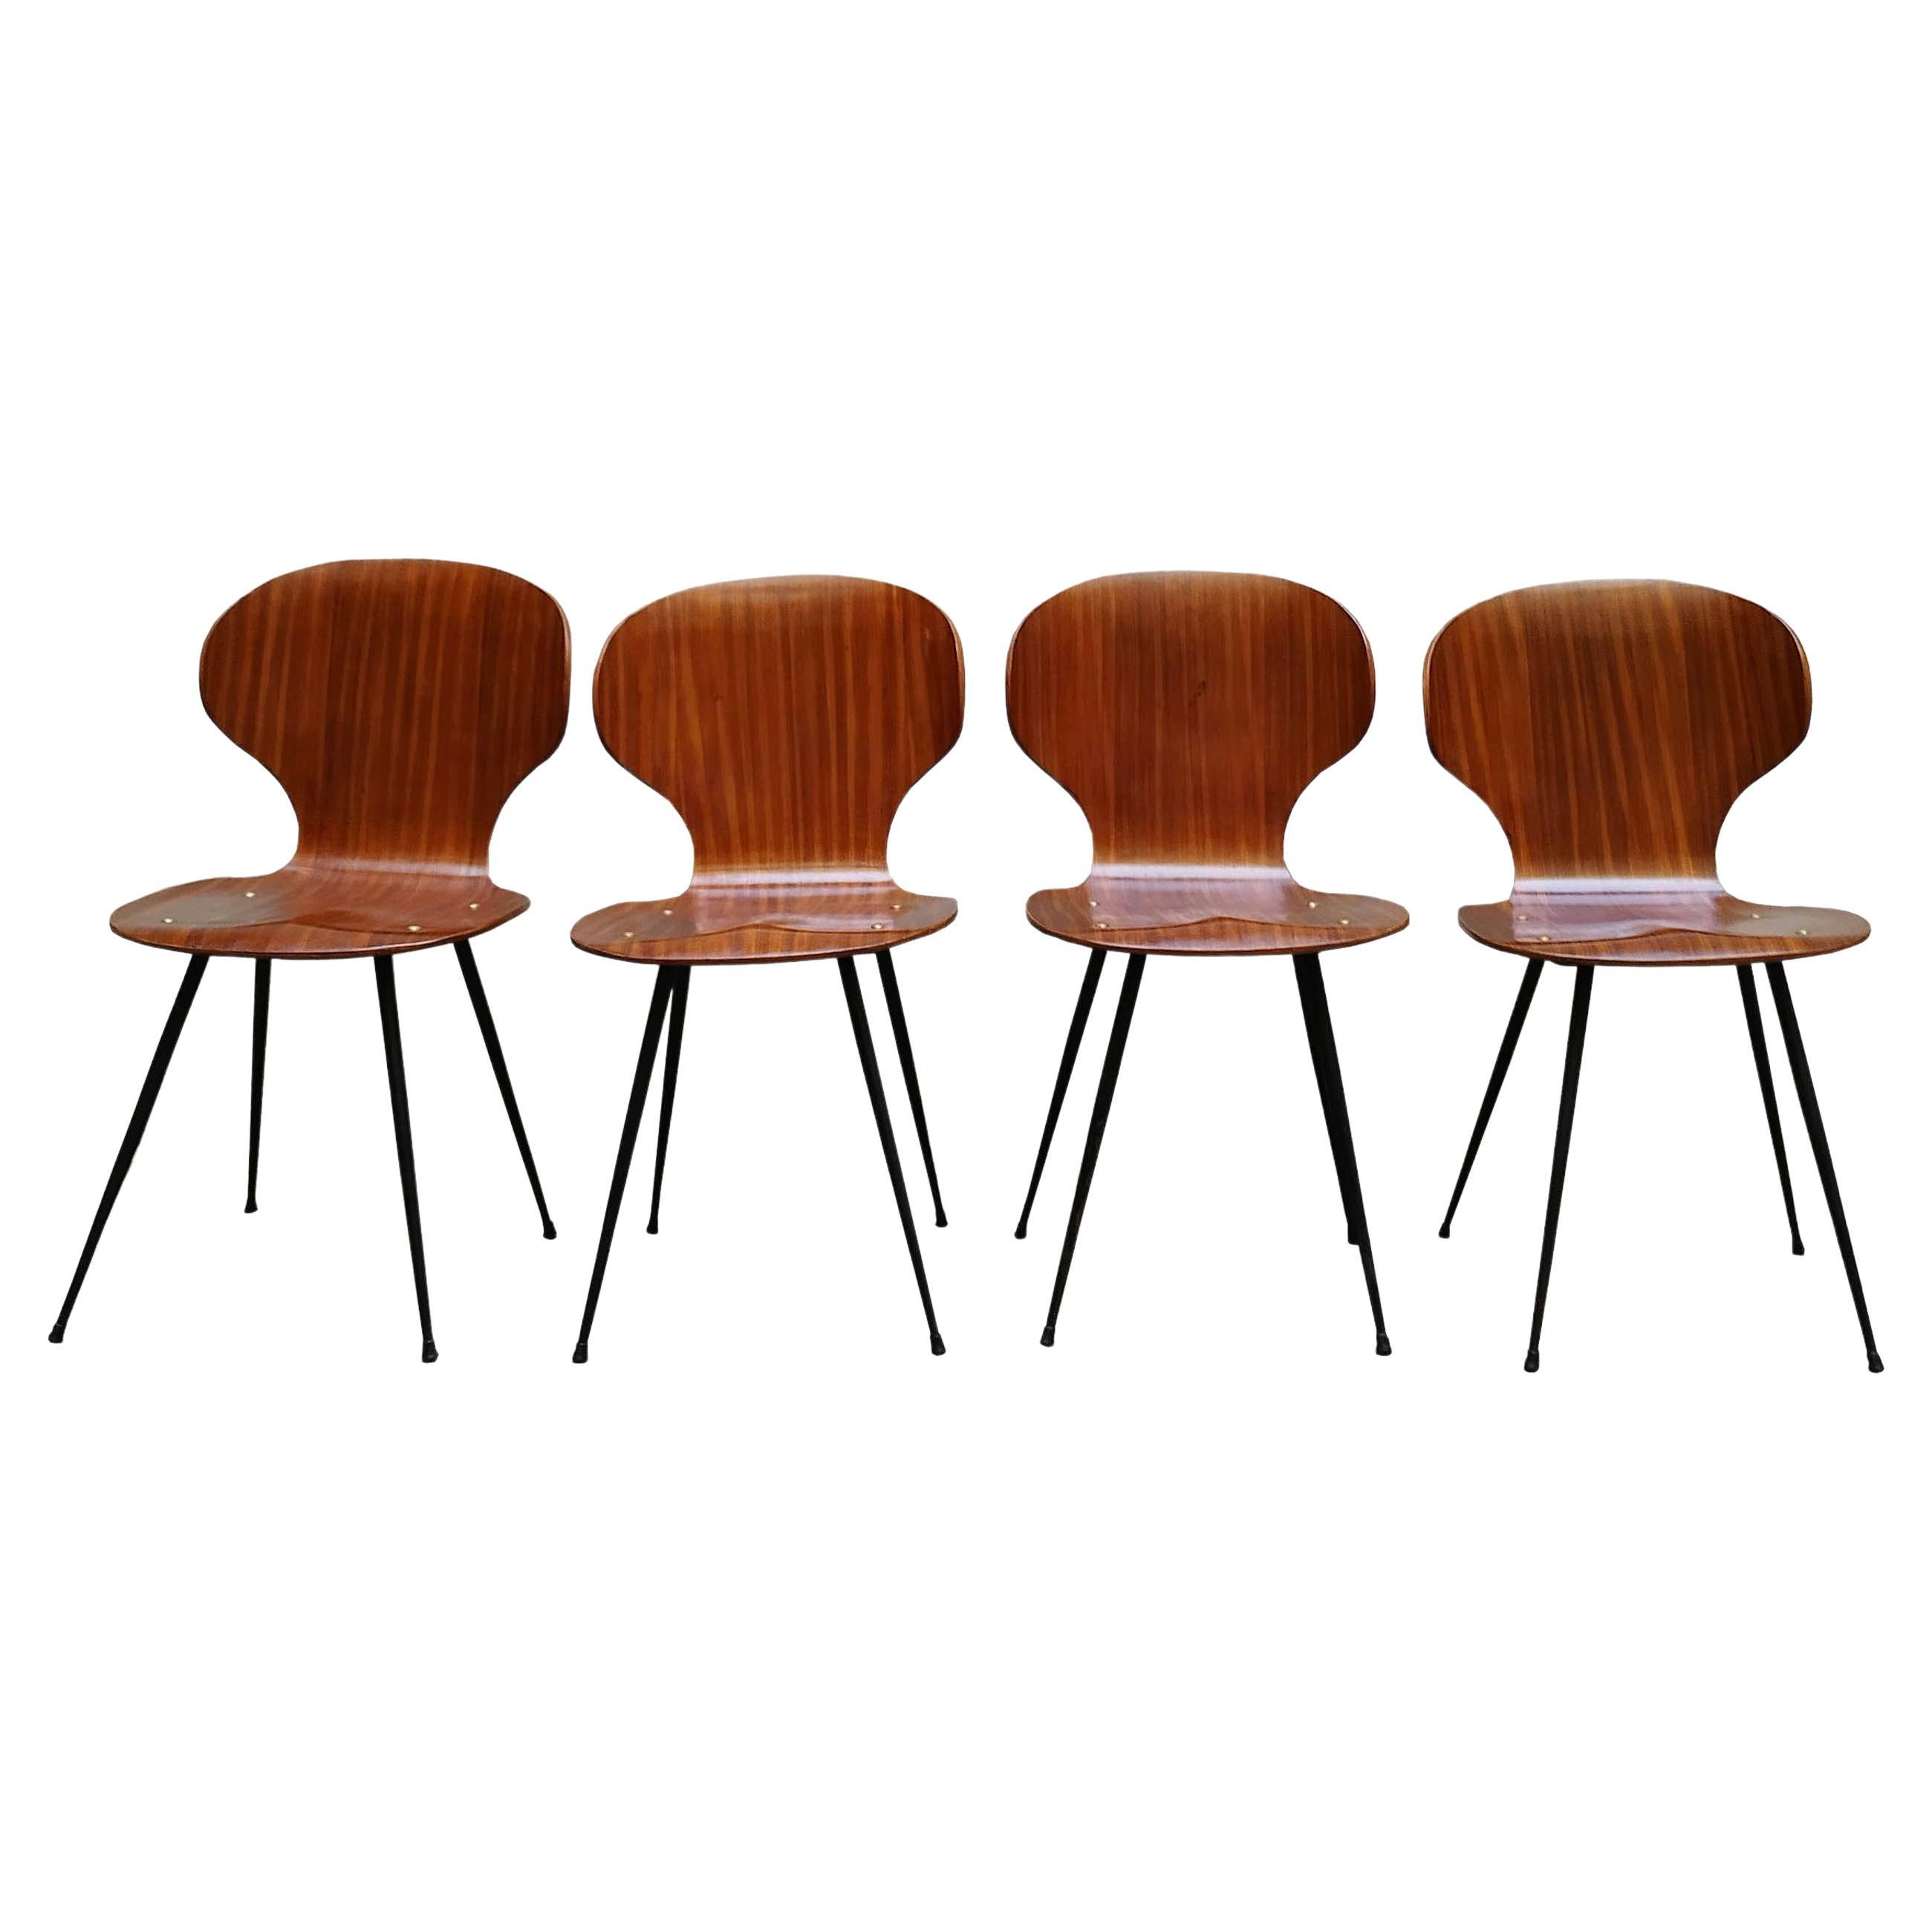 Carlo Ratti Set of 4 Teak Chairs, Italy 1950s For Sale